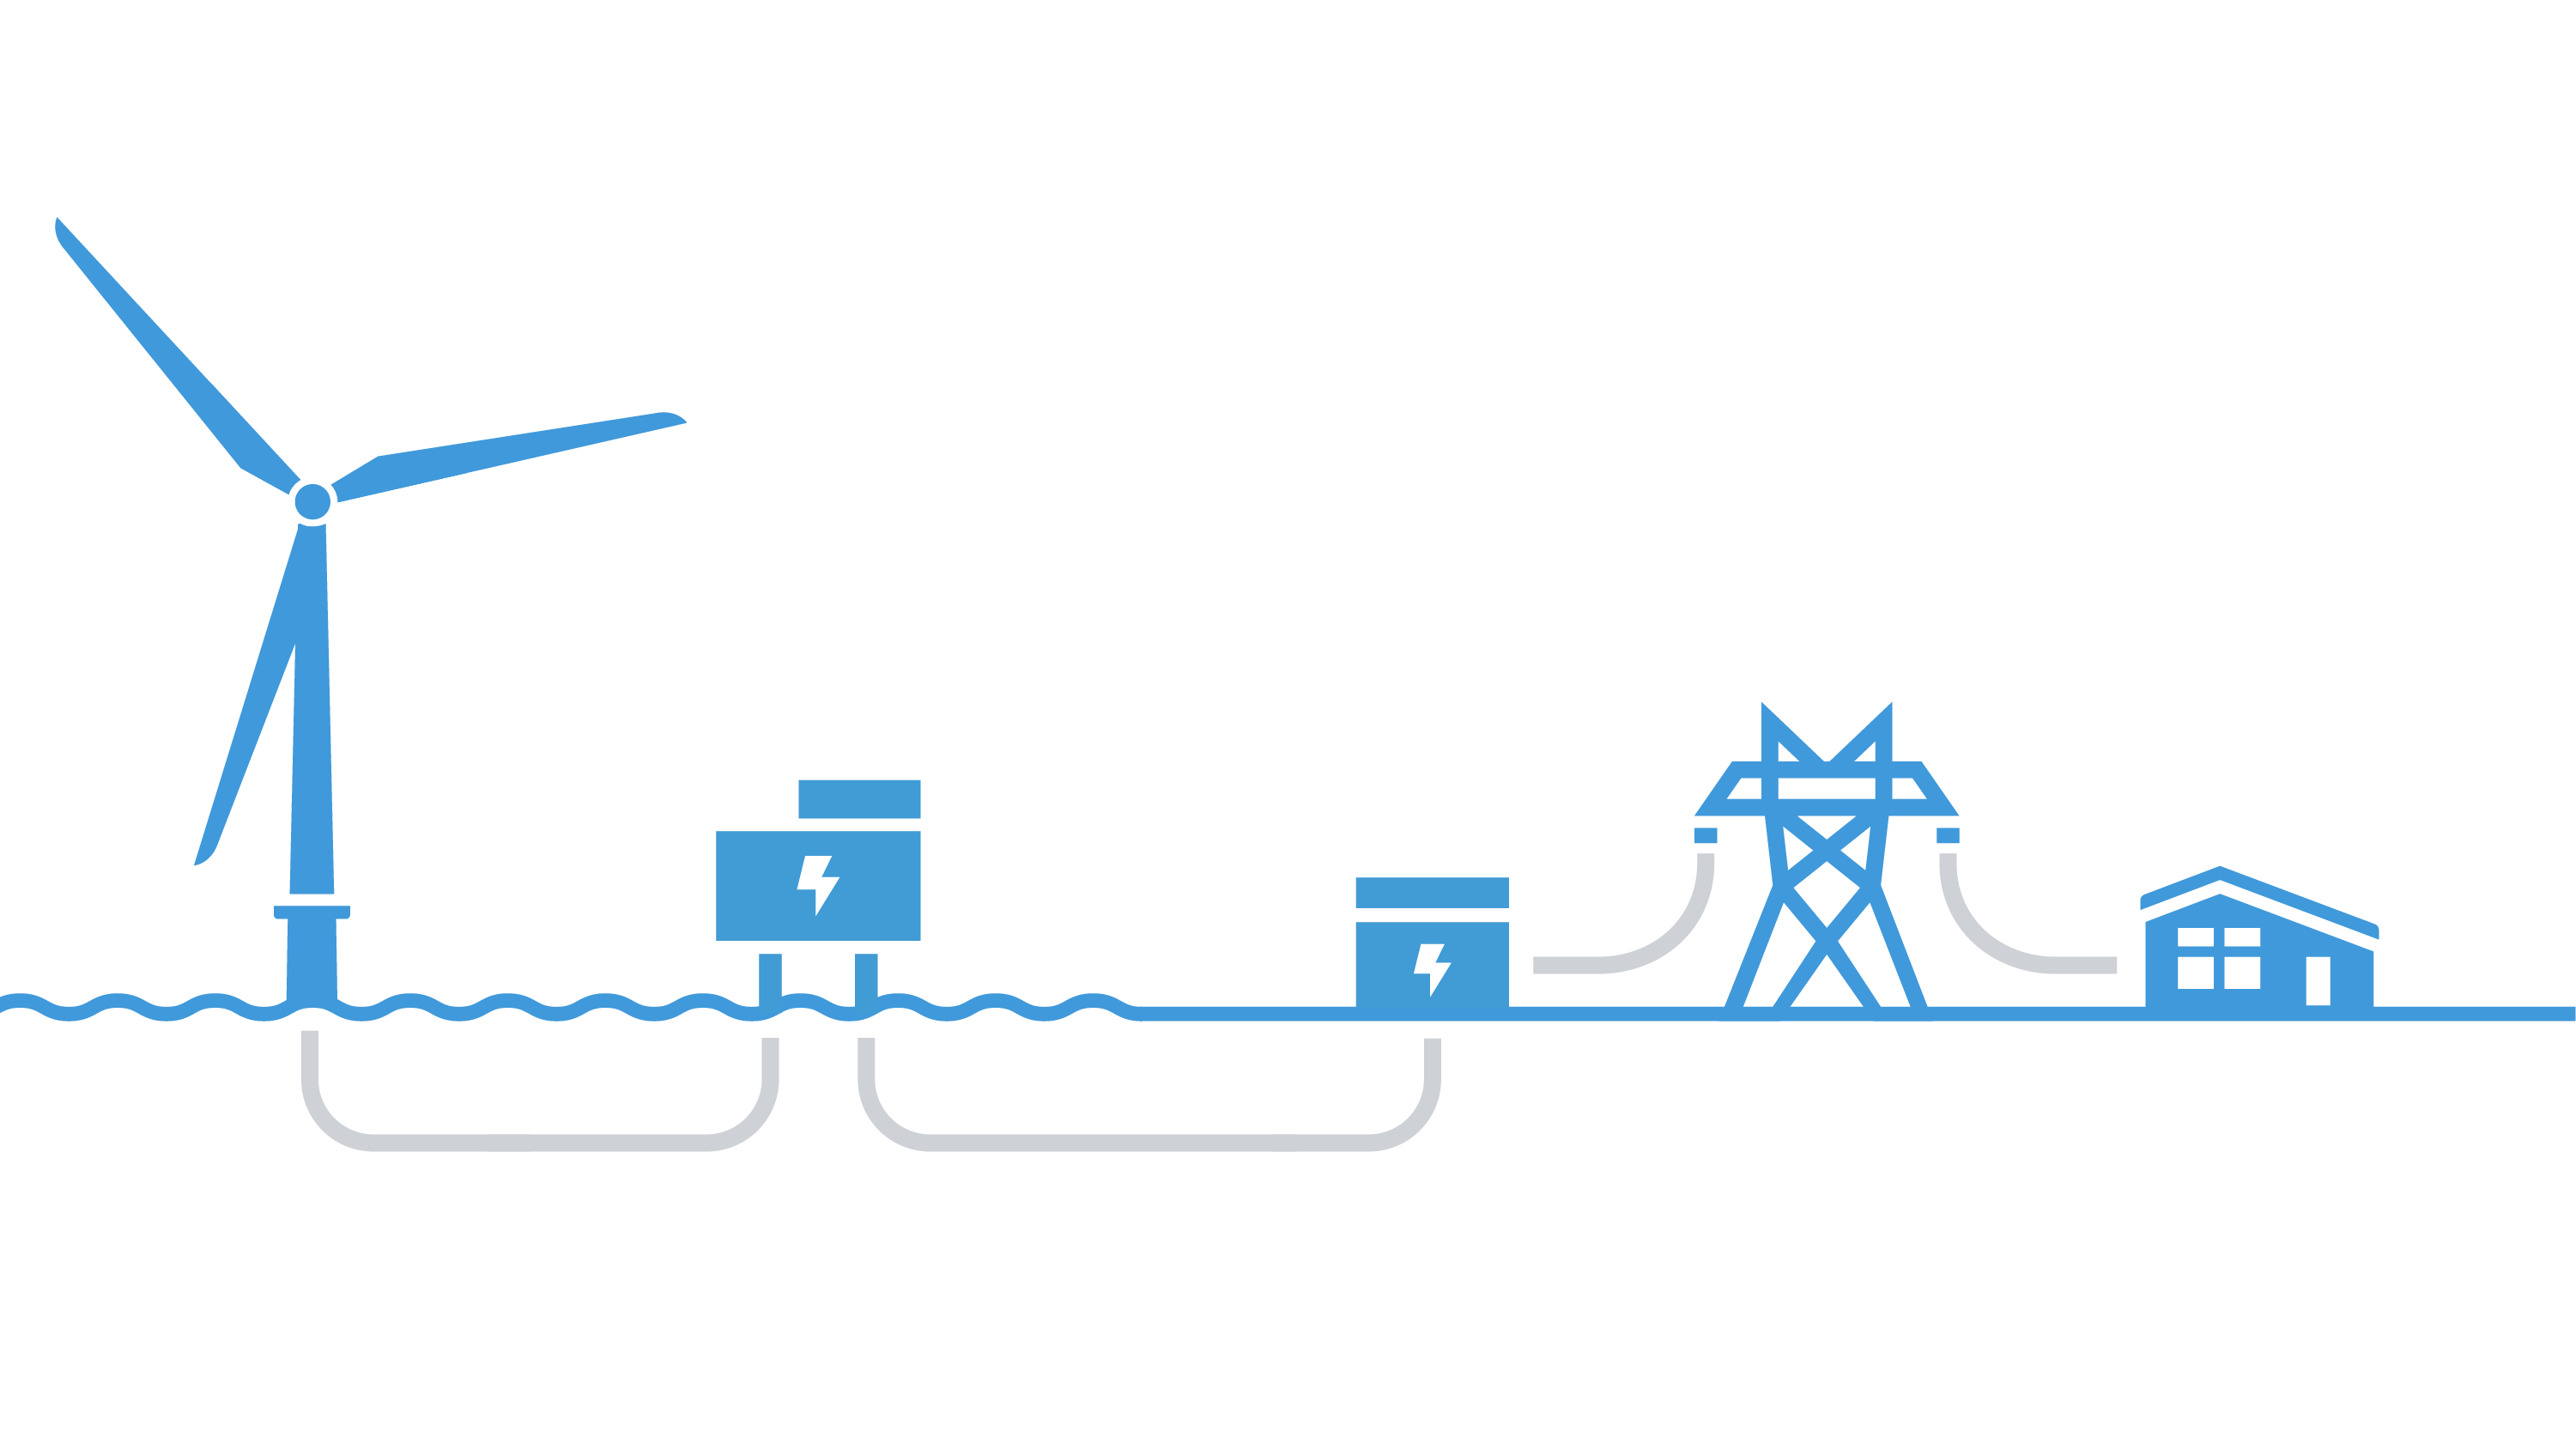 Connected blue pictograms show how offshore wind turbines work, generating clean energy and transferring it onshore.